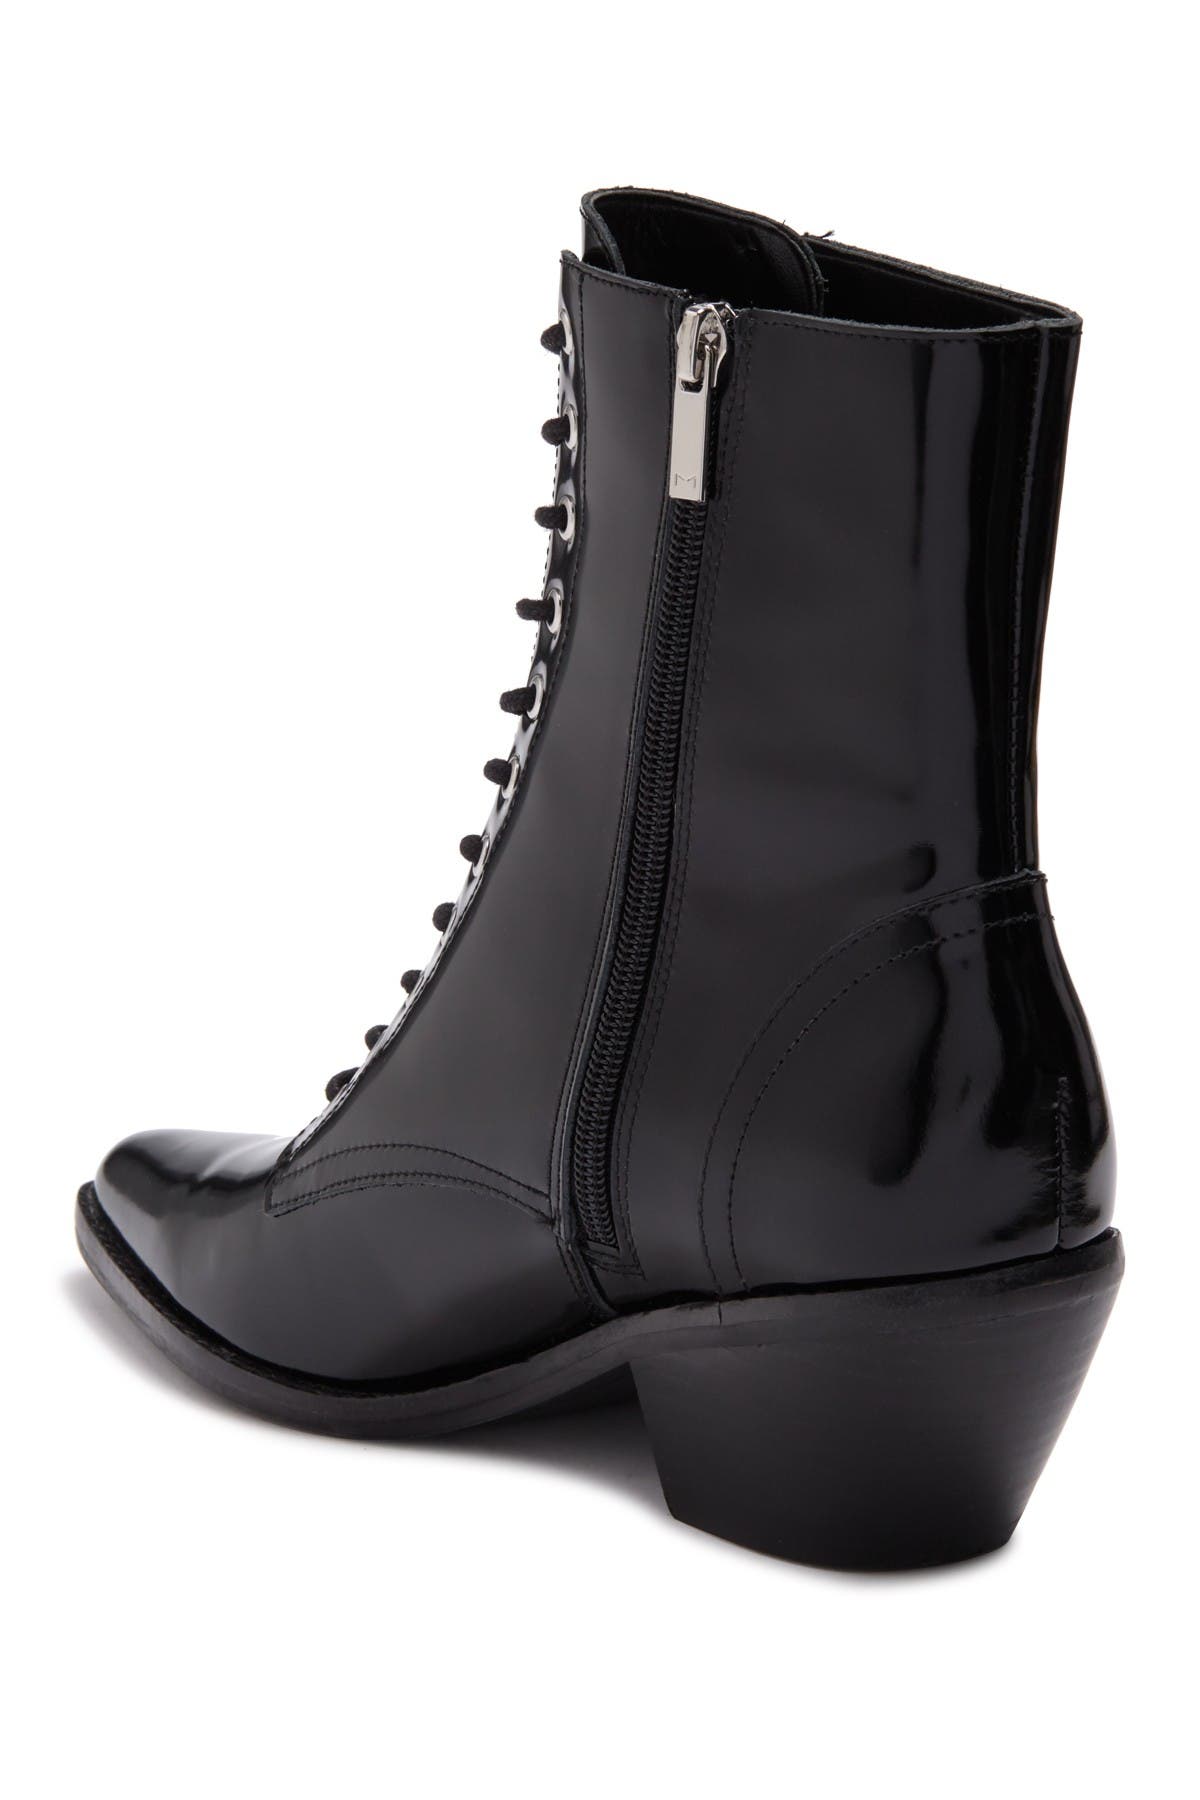 marc fisher bowie lace up boot